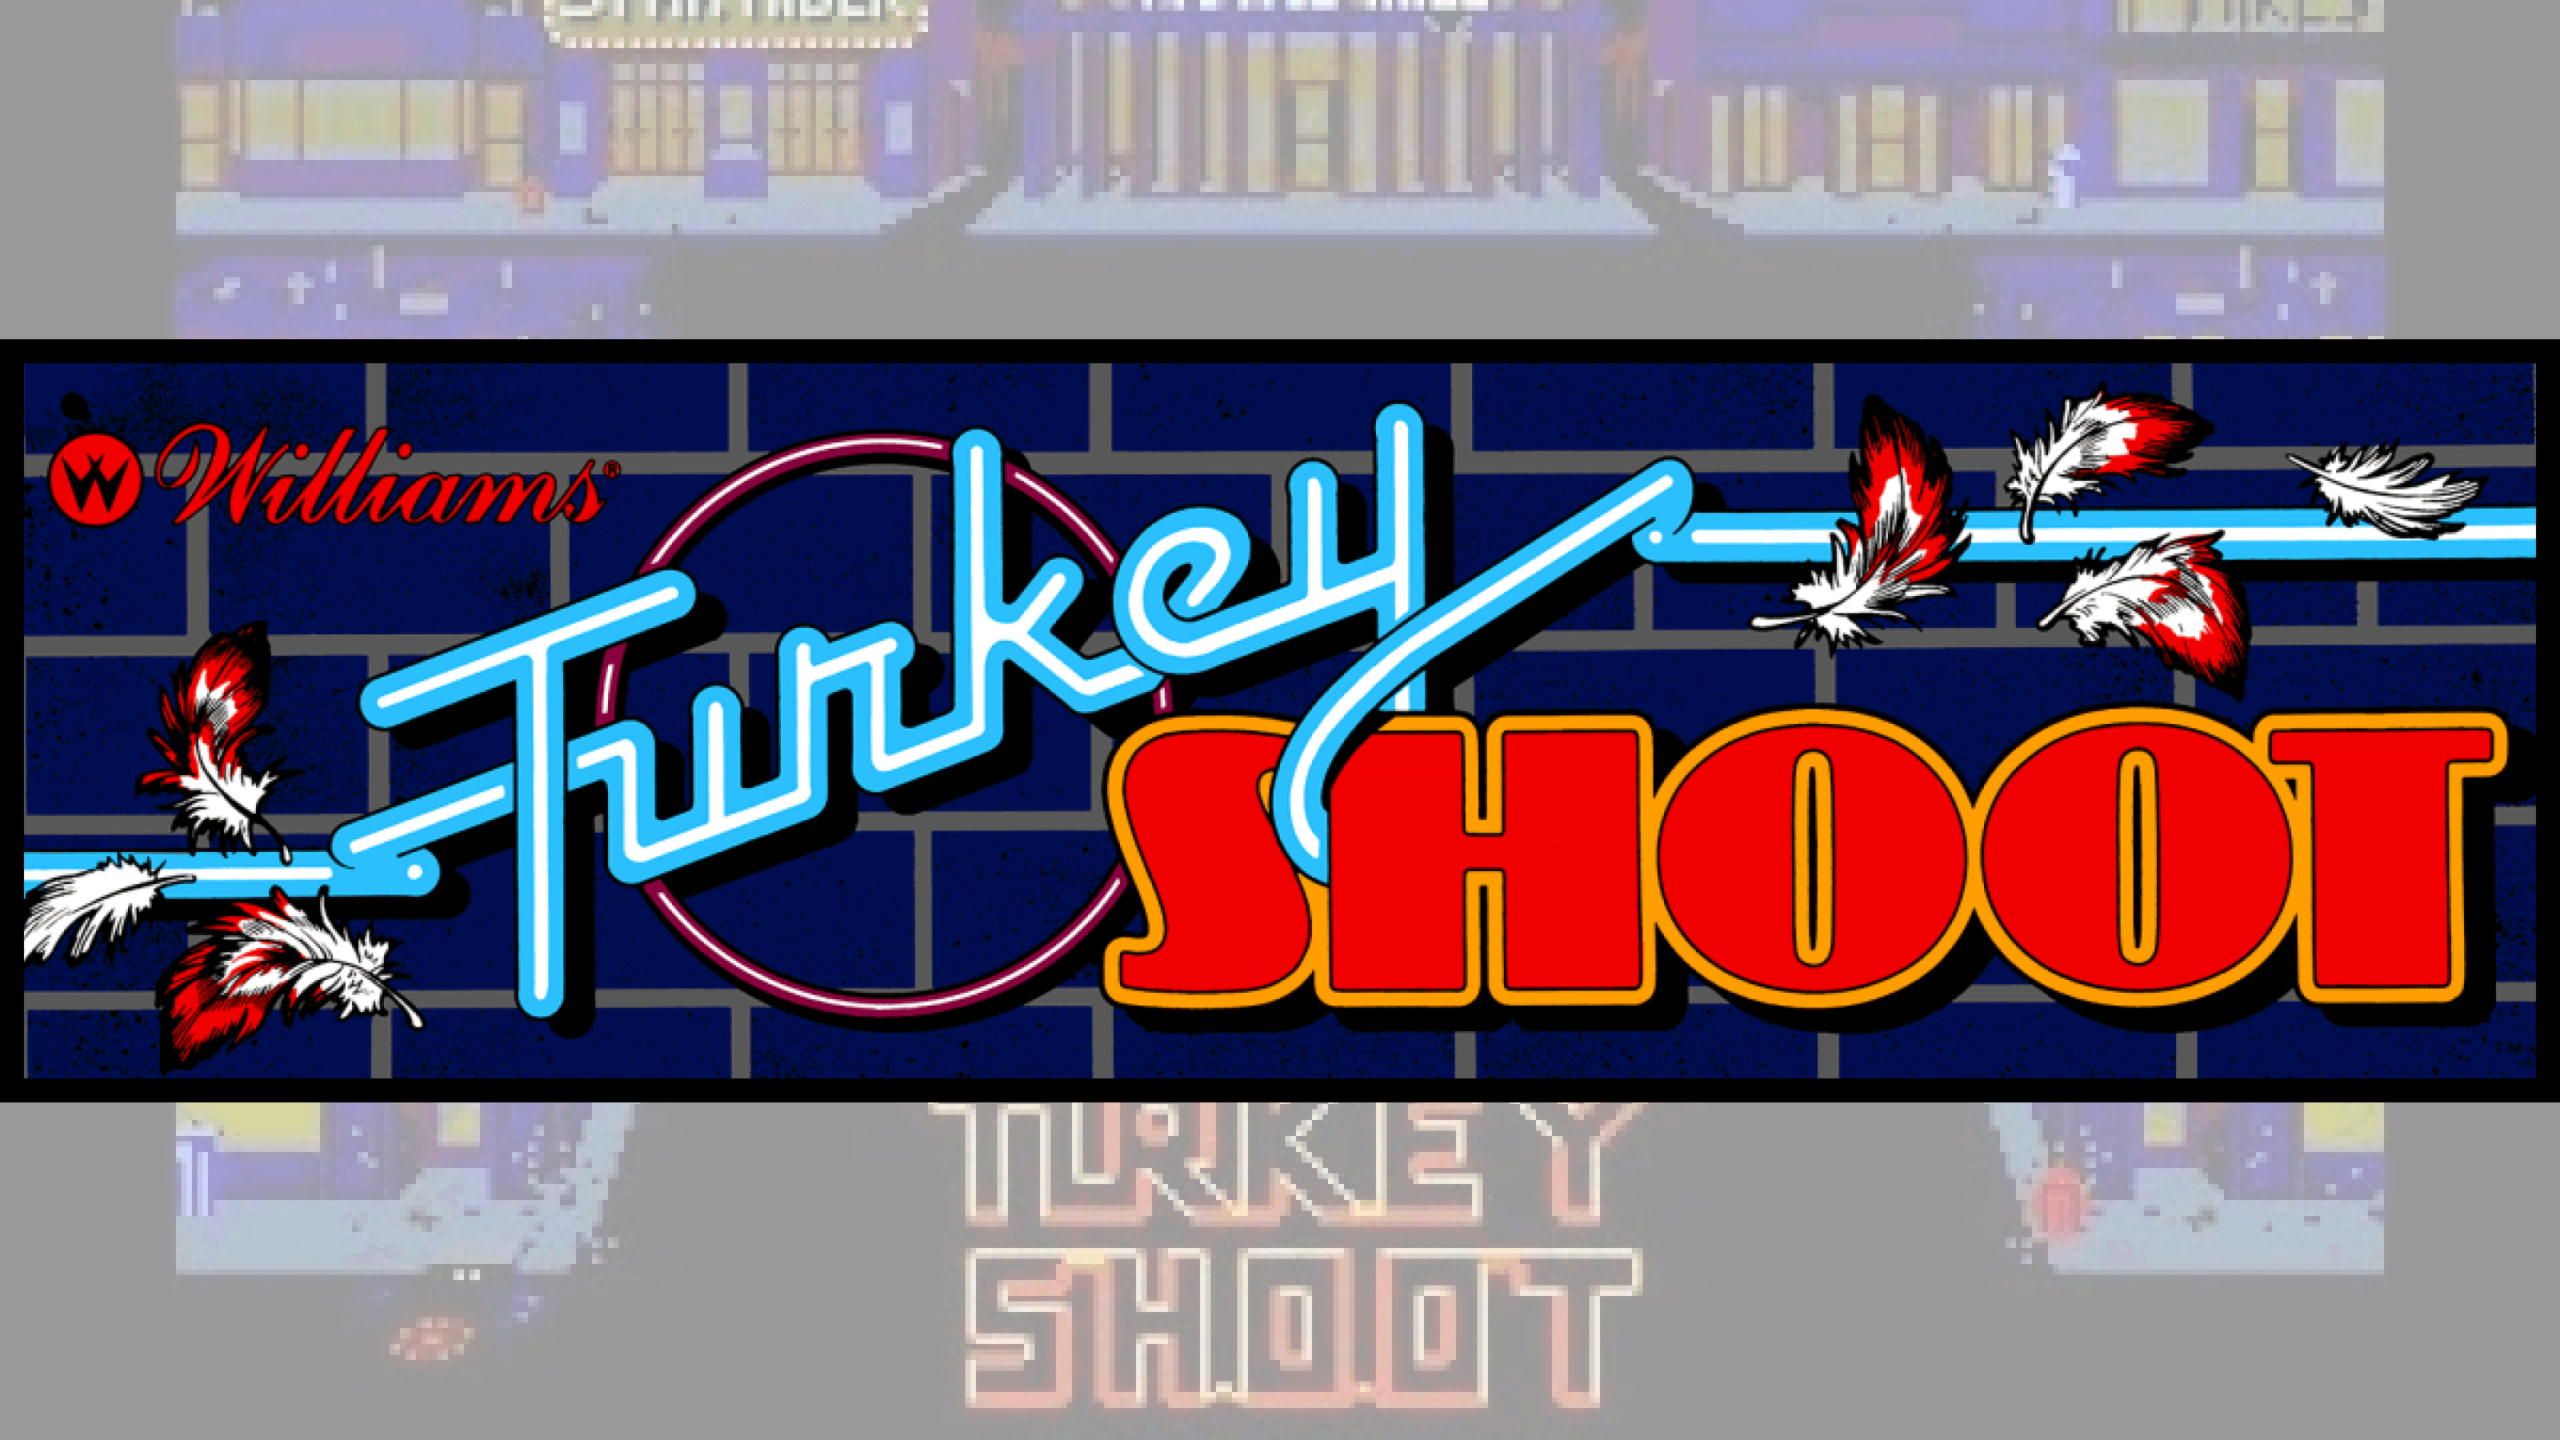 You are currently viewing A World of Games: Turkey Shoot